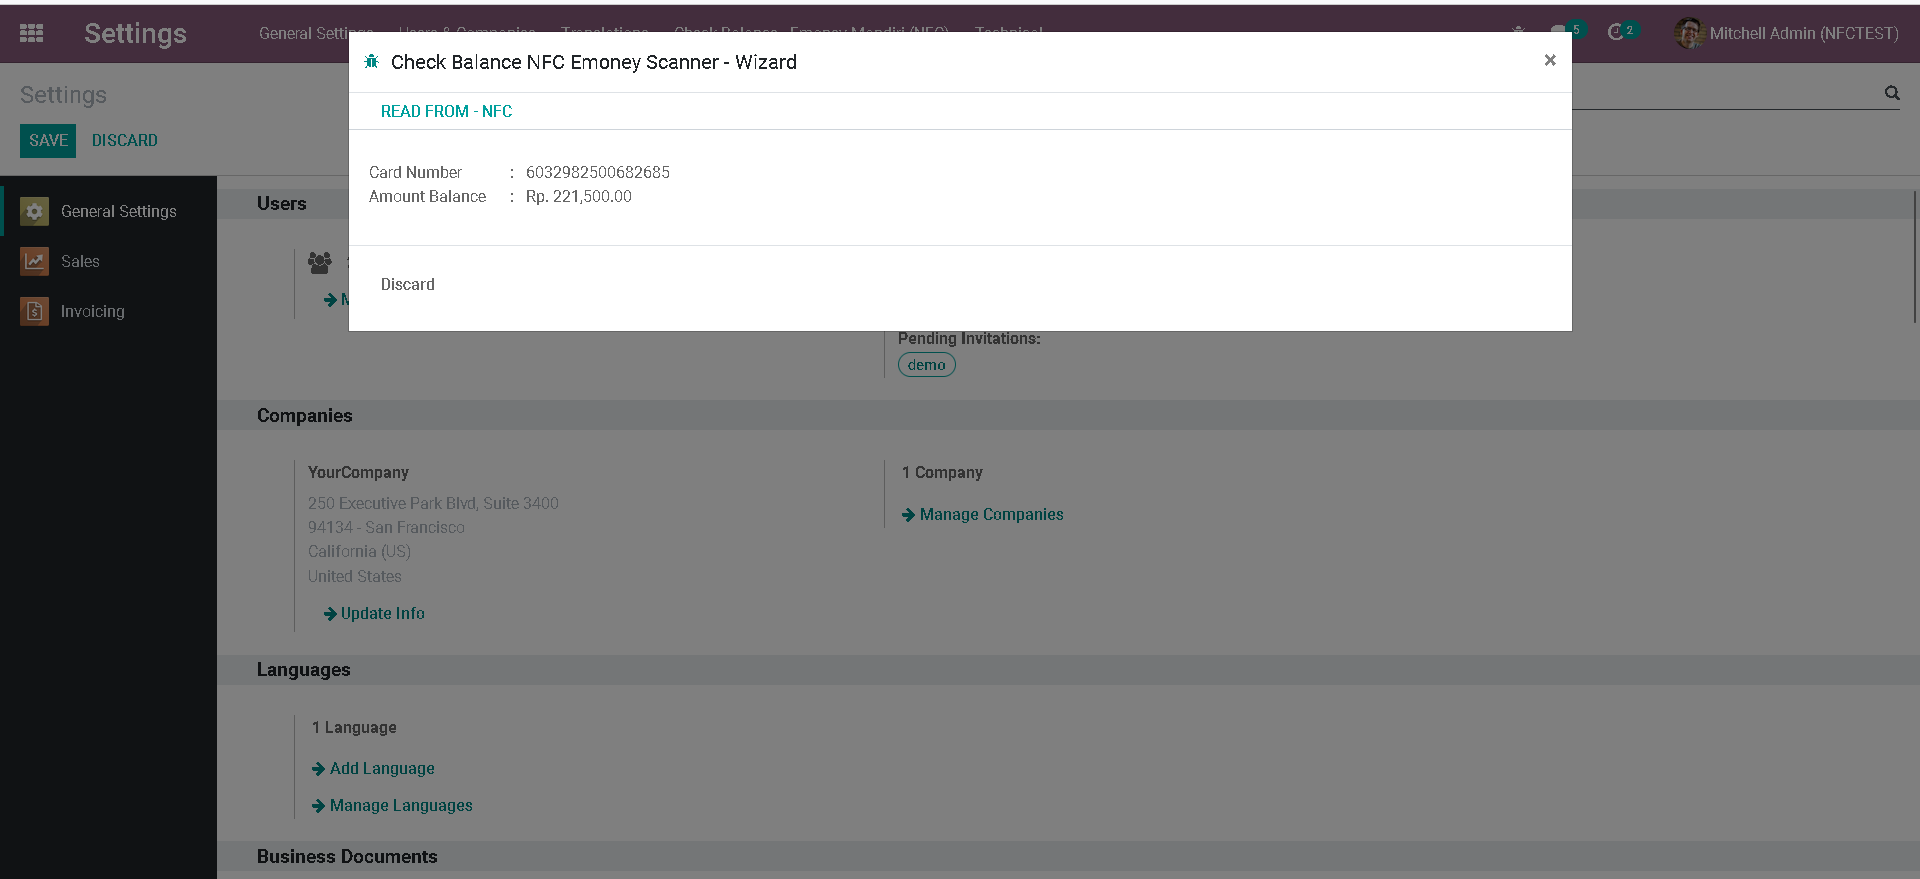  The image shows the 'Machine EDC for emoney balance check' search results page in Odoo.